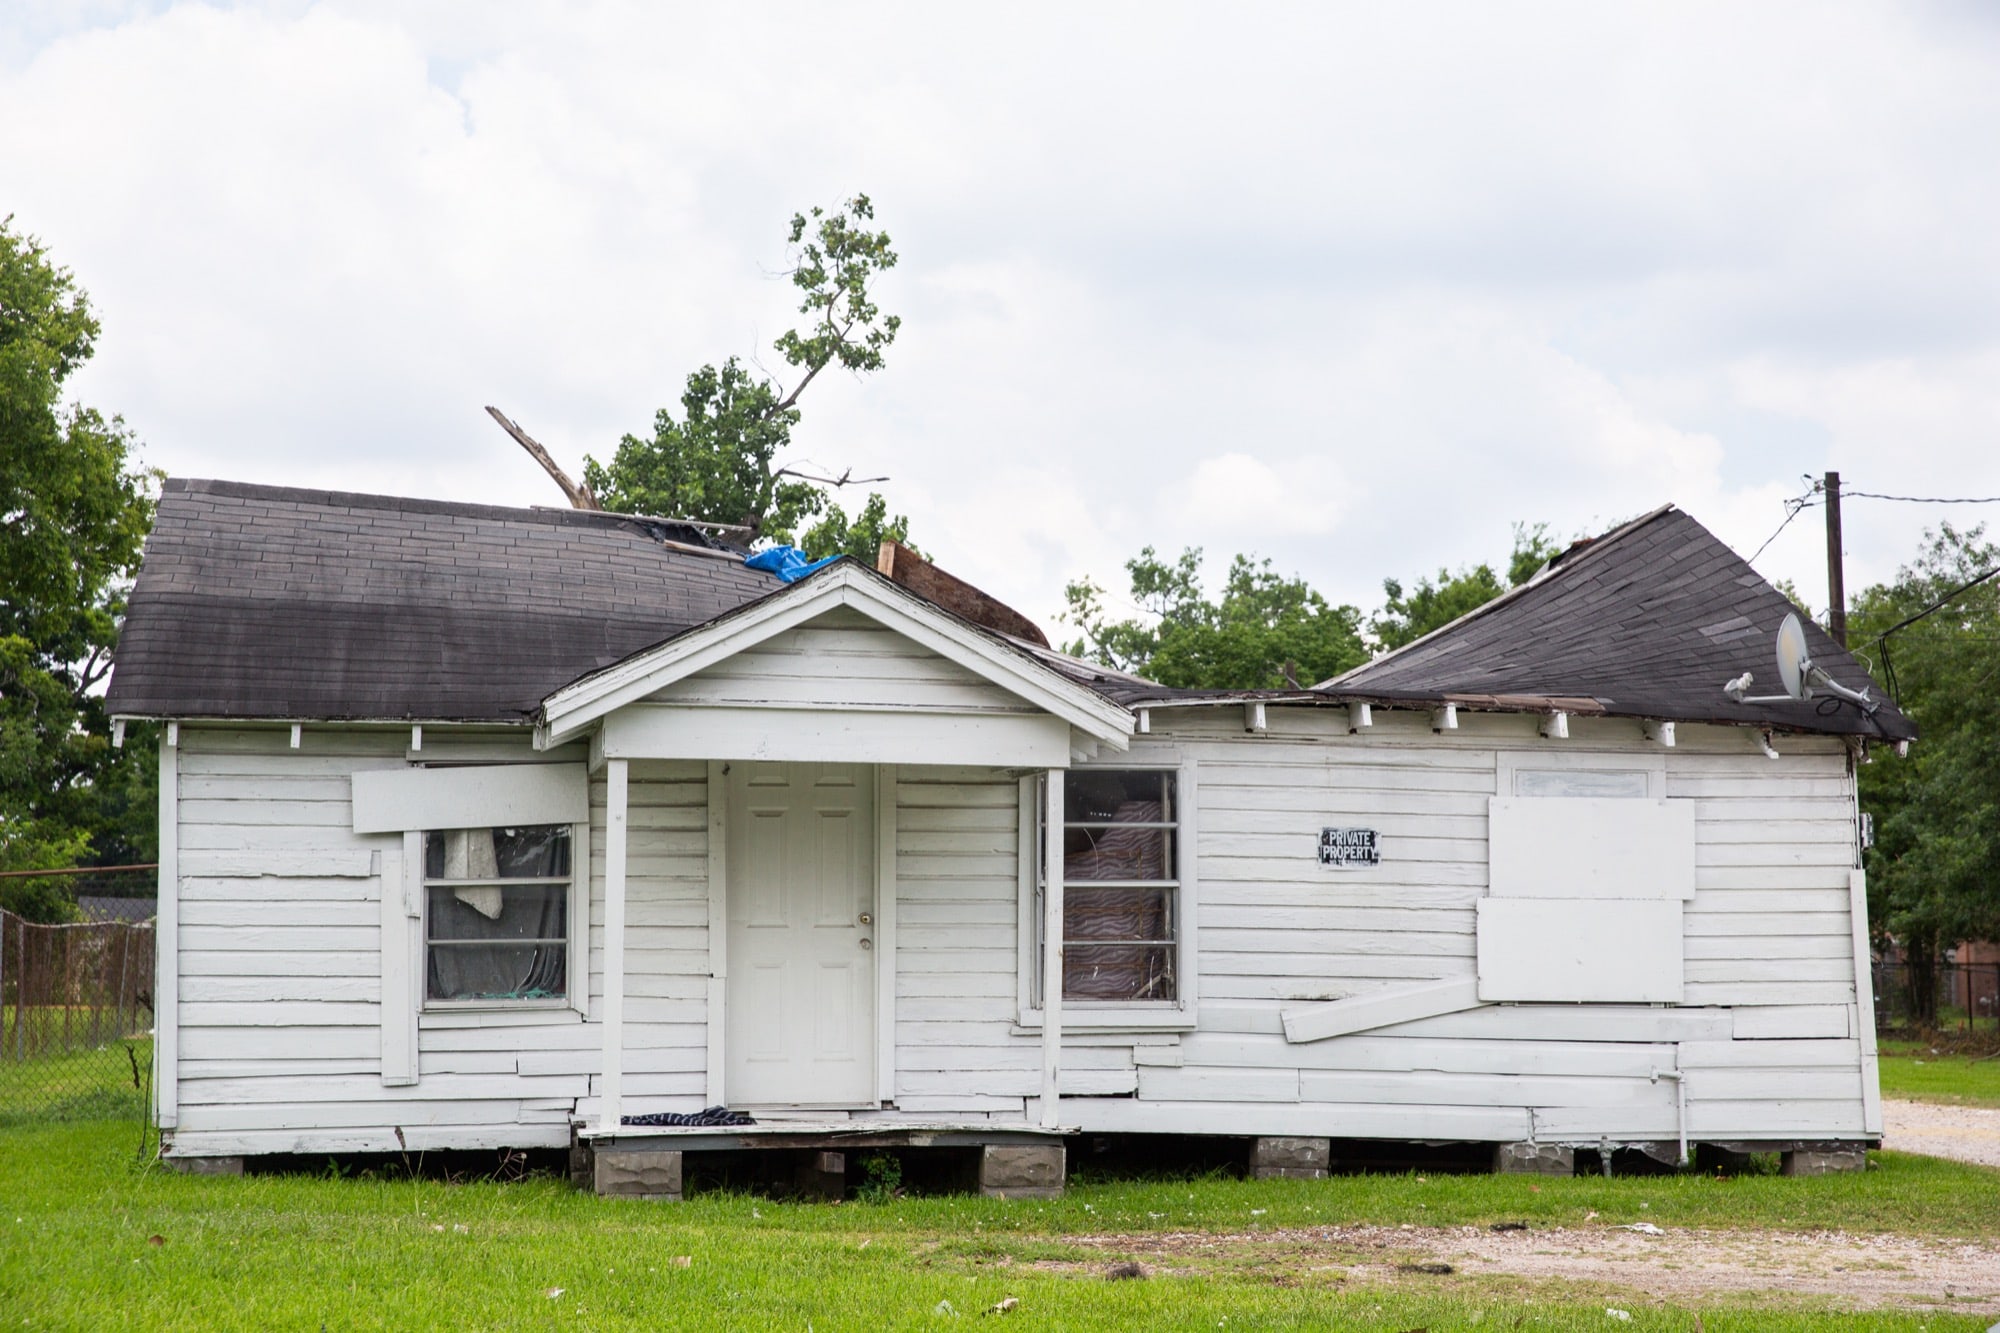 Much of Kashmere Gardens, a historically black and low-income neighborhood in Houston, looks like Hurricane Harvey struck just a few weeks ago rather than two years. Colleen Henneke, a volunteer with the nonprofit Houston Responds, said team members are still encountering people living in nearly destroyed and mold-infested homes.  (Stacy Fernández/News21)